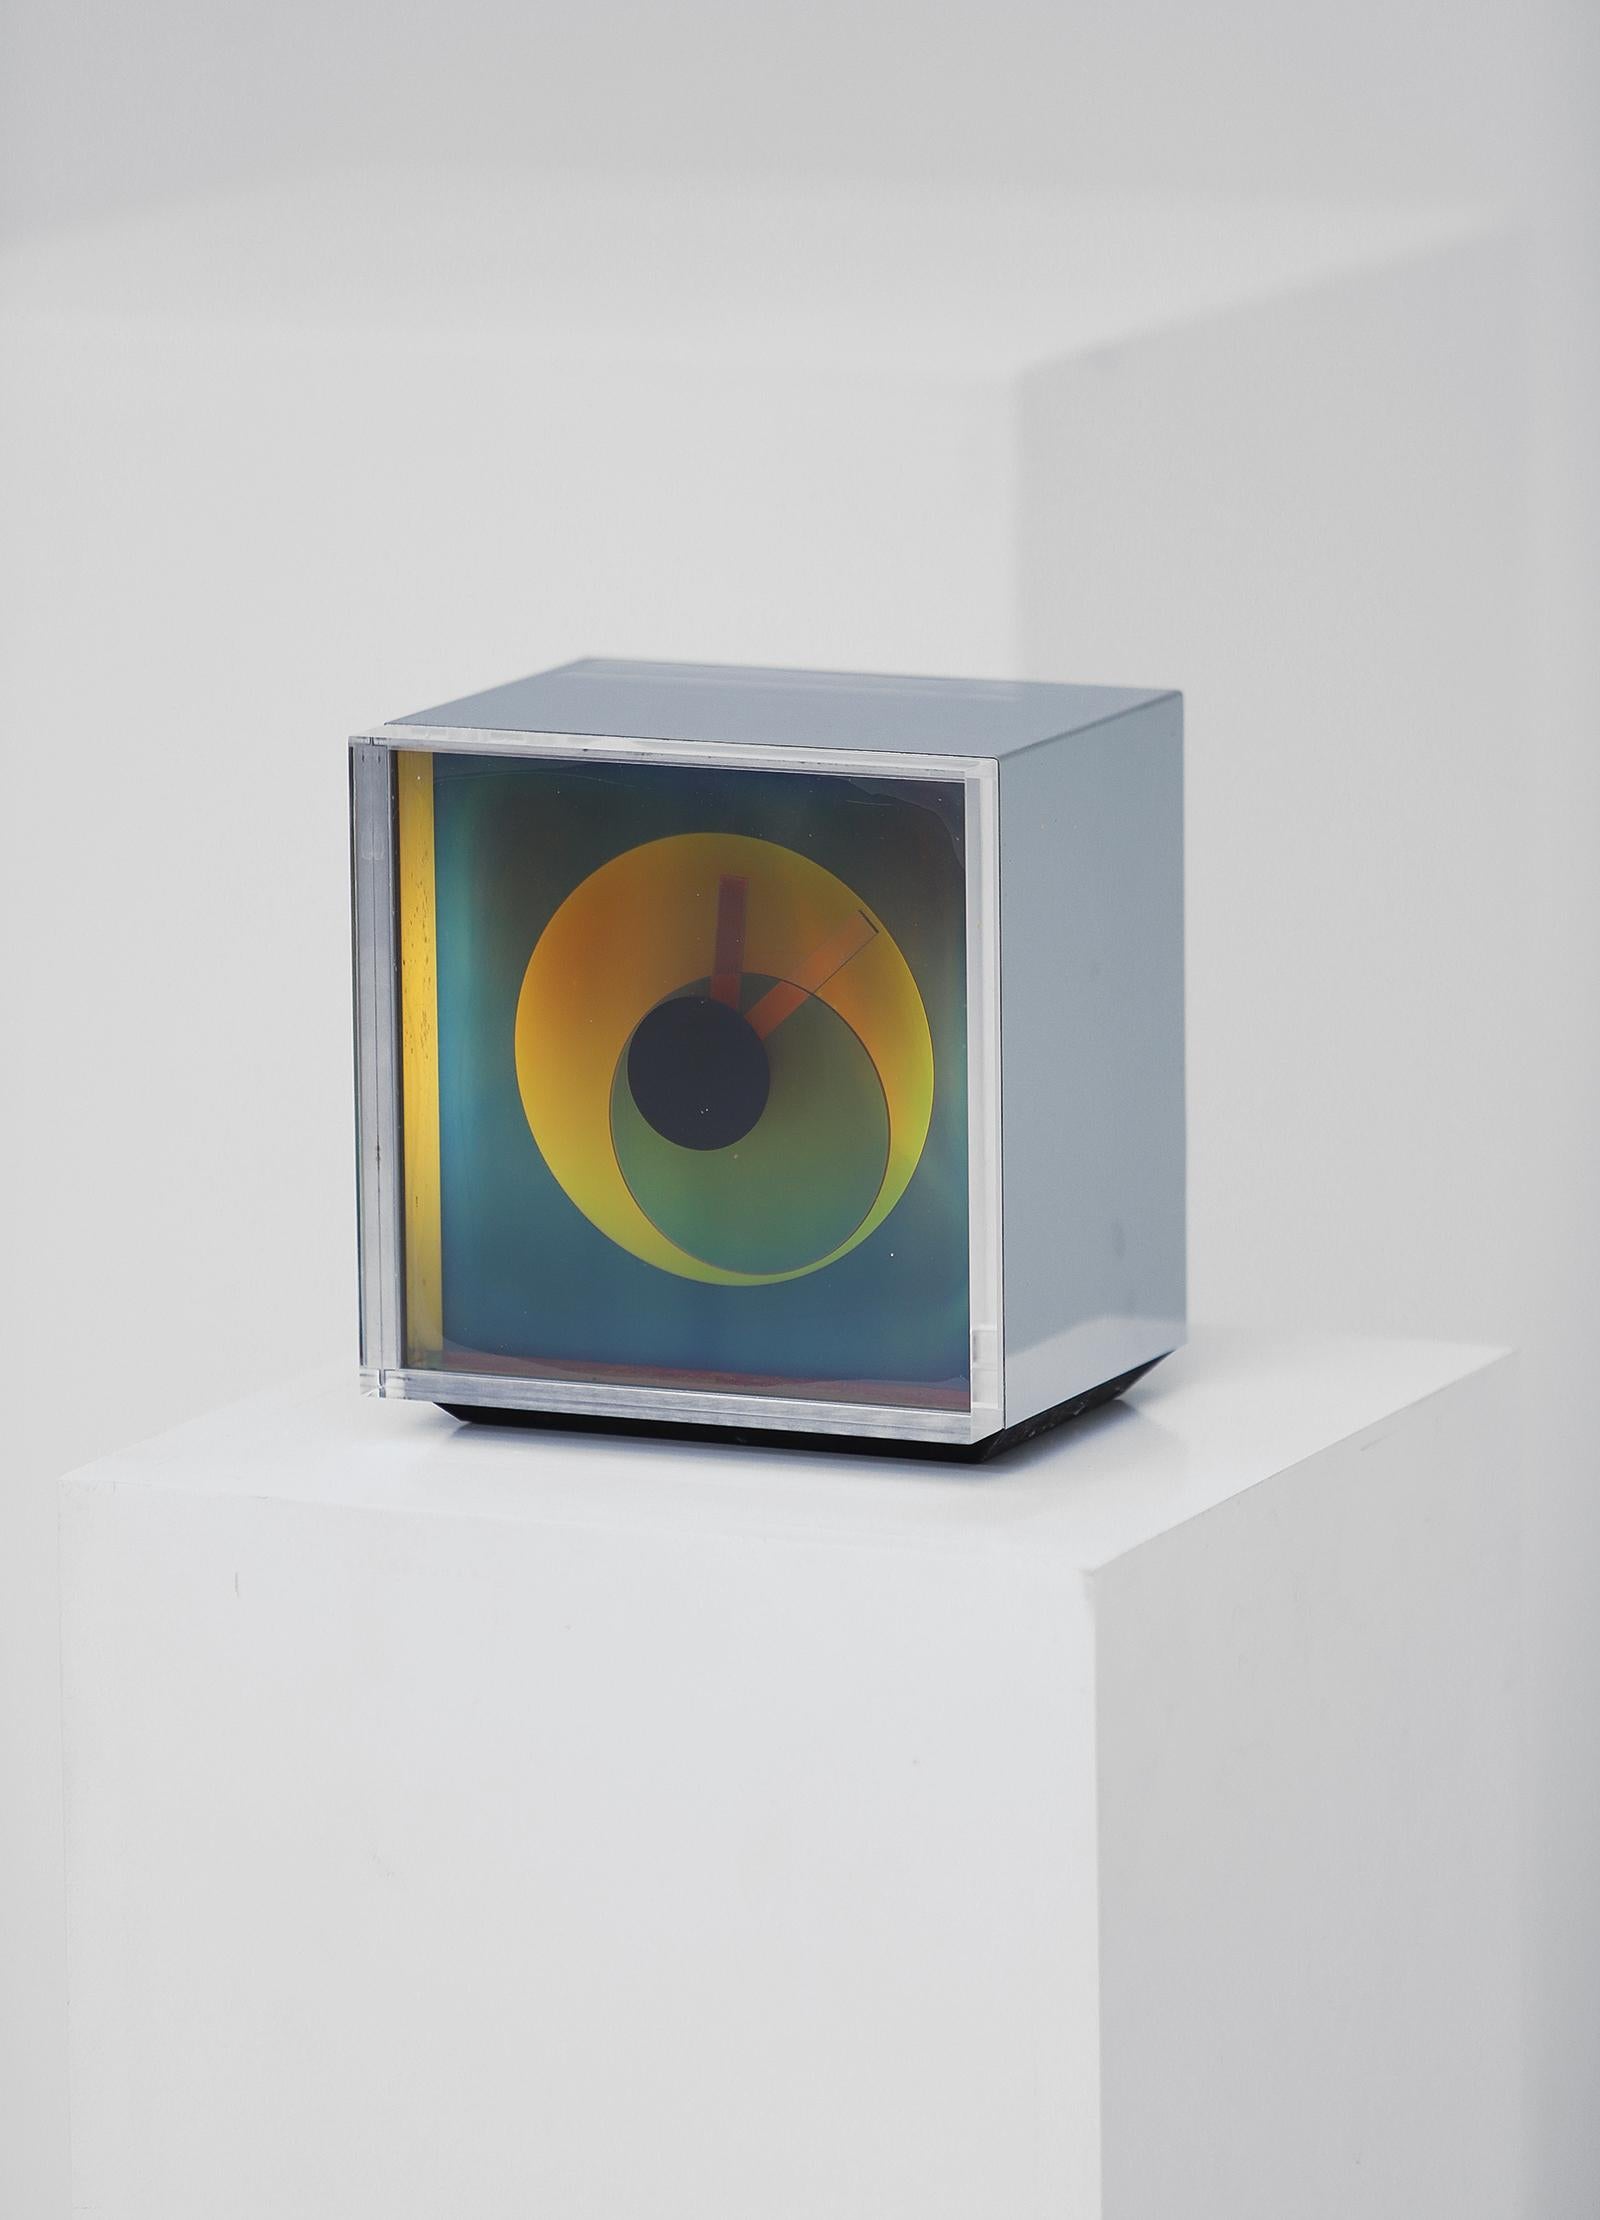 A vintage 1970s Aurora clock with original box. These stunning clocks are in the collection of the Museum of Modern Art MOMA in NY. Developed in the 1970s by a NASA engineer and an architect these stunners were first produced by Rathcon and later